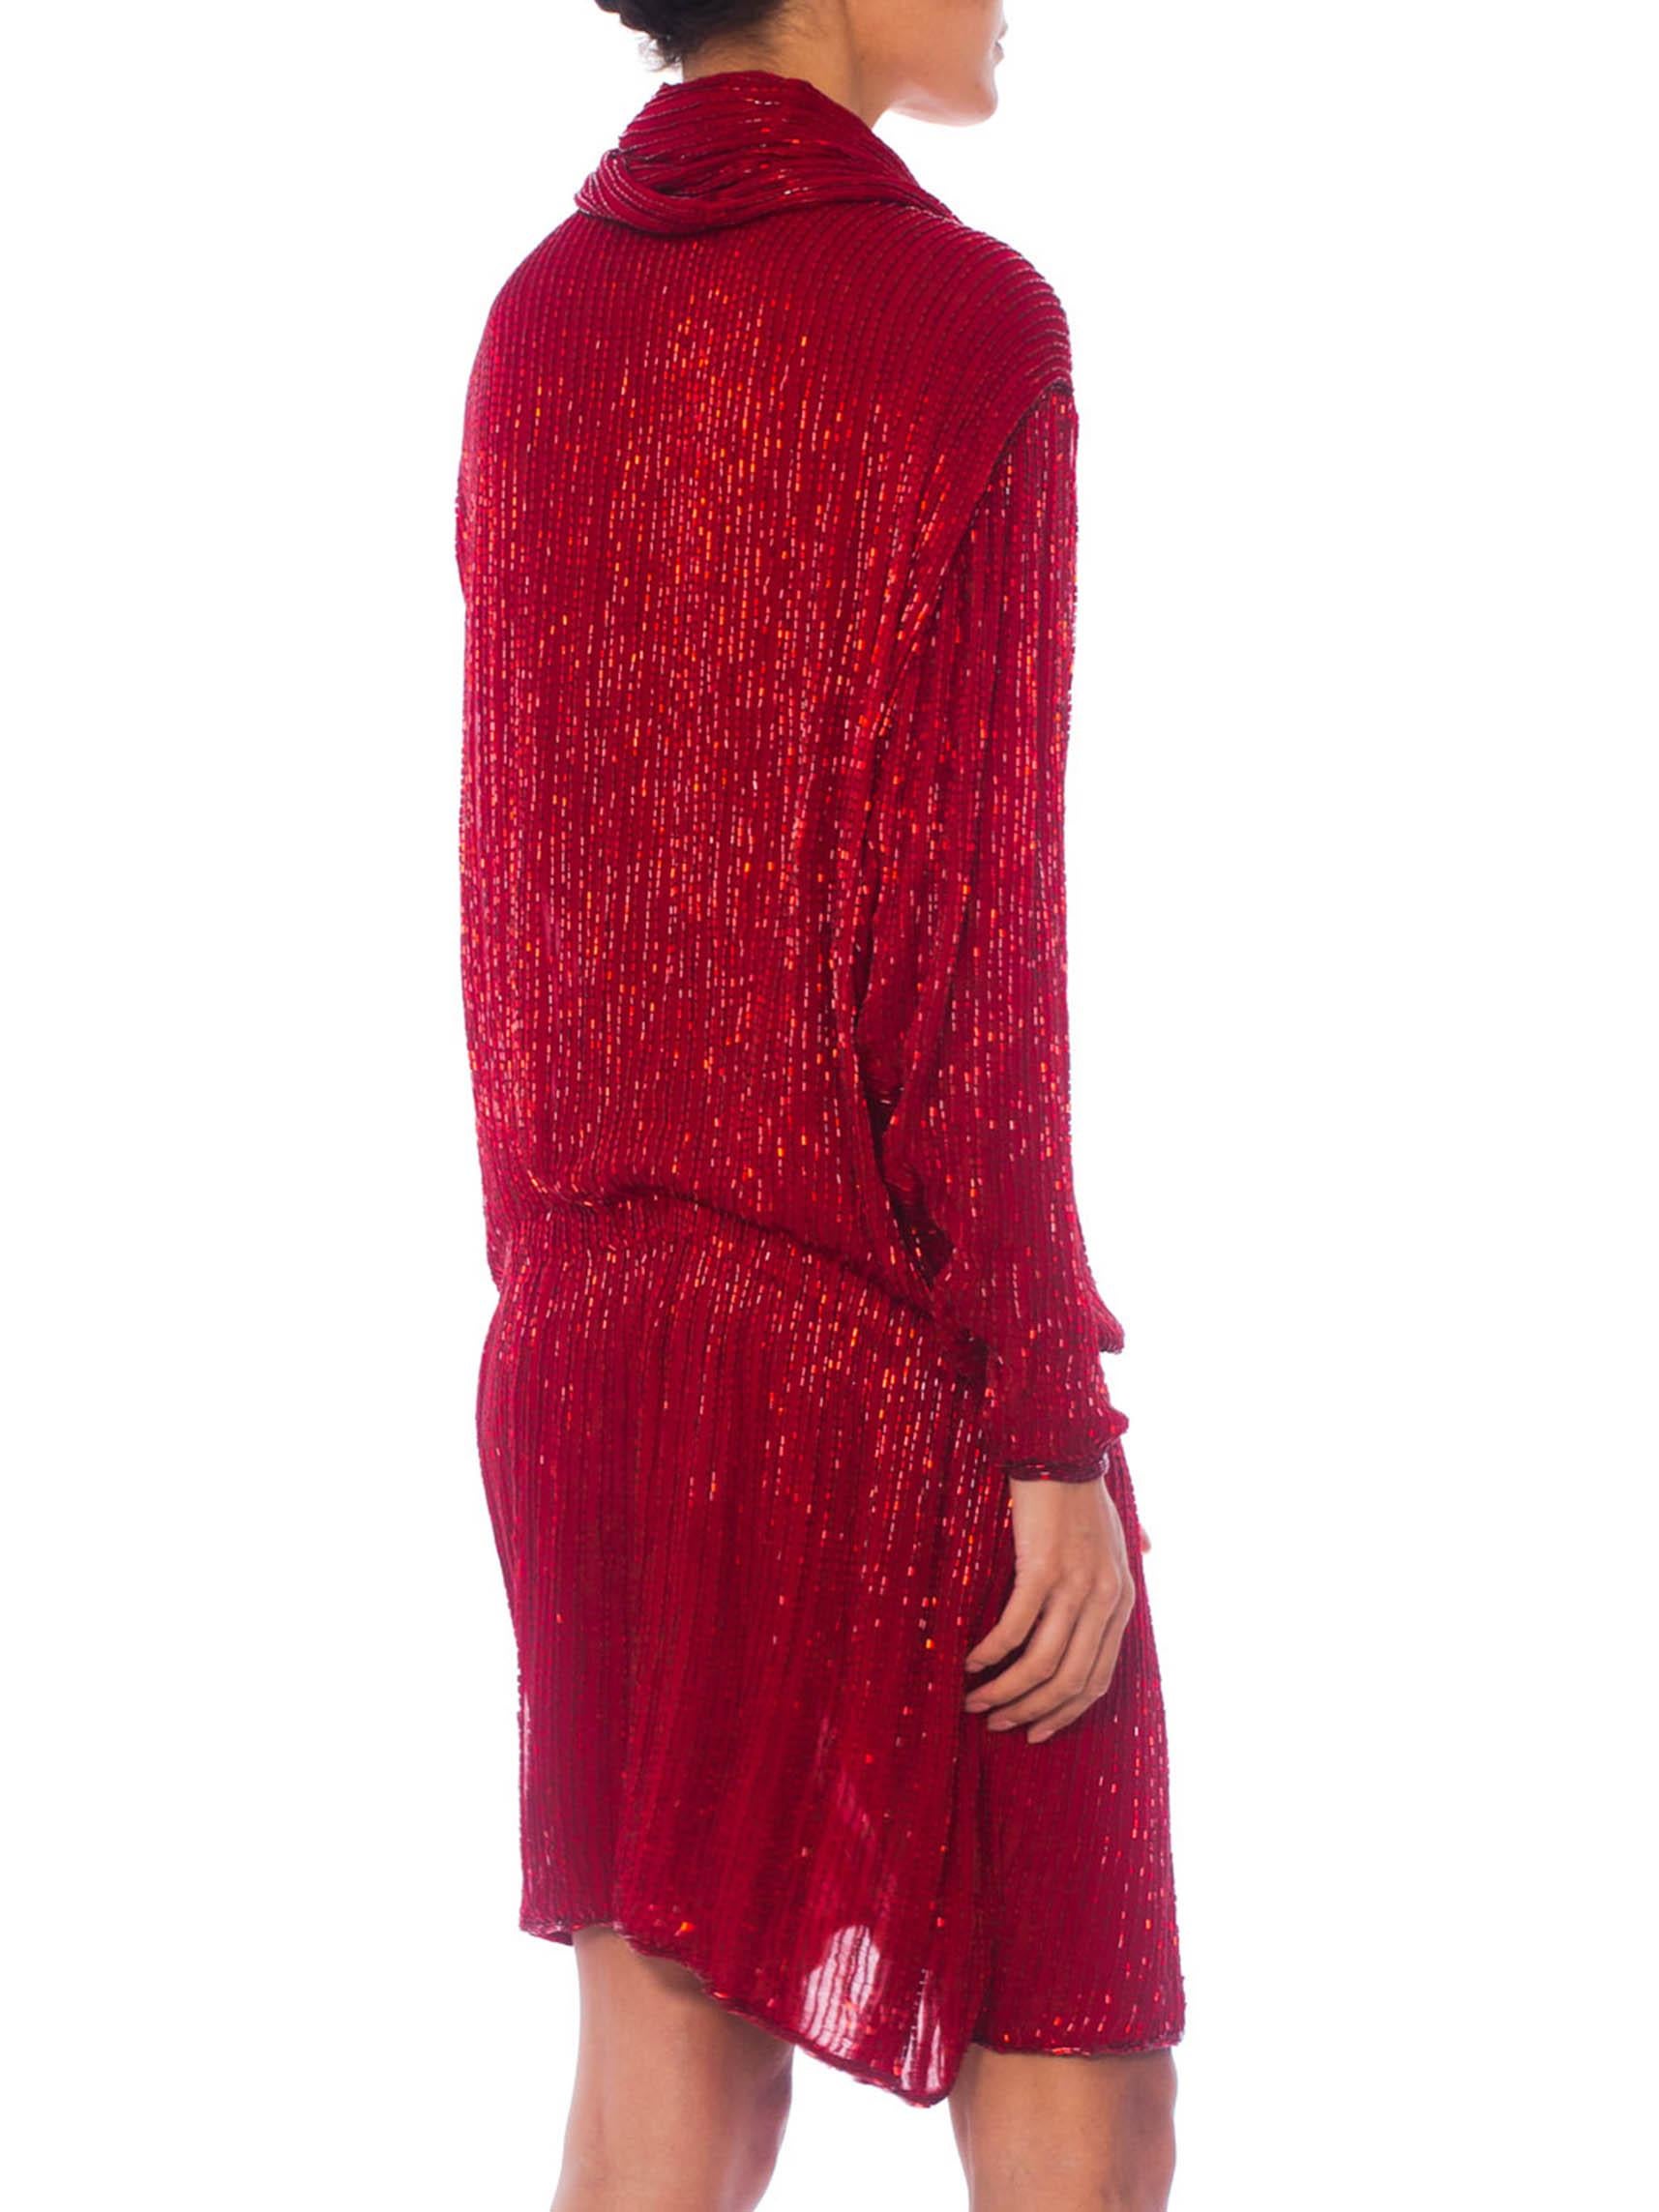 1970S HALSTON Red Silk Chiffon Oversized Mini Cocktail Dress Covered In Bugle B For Sale 2